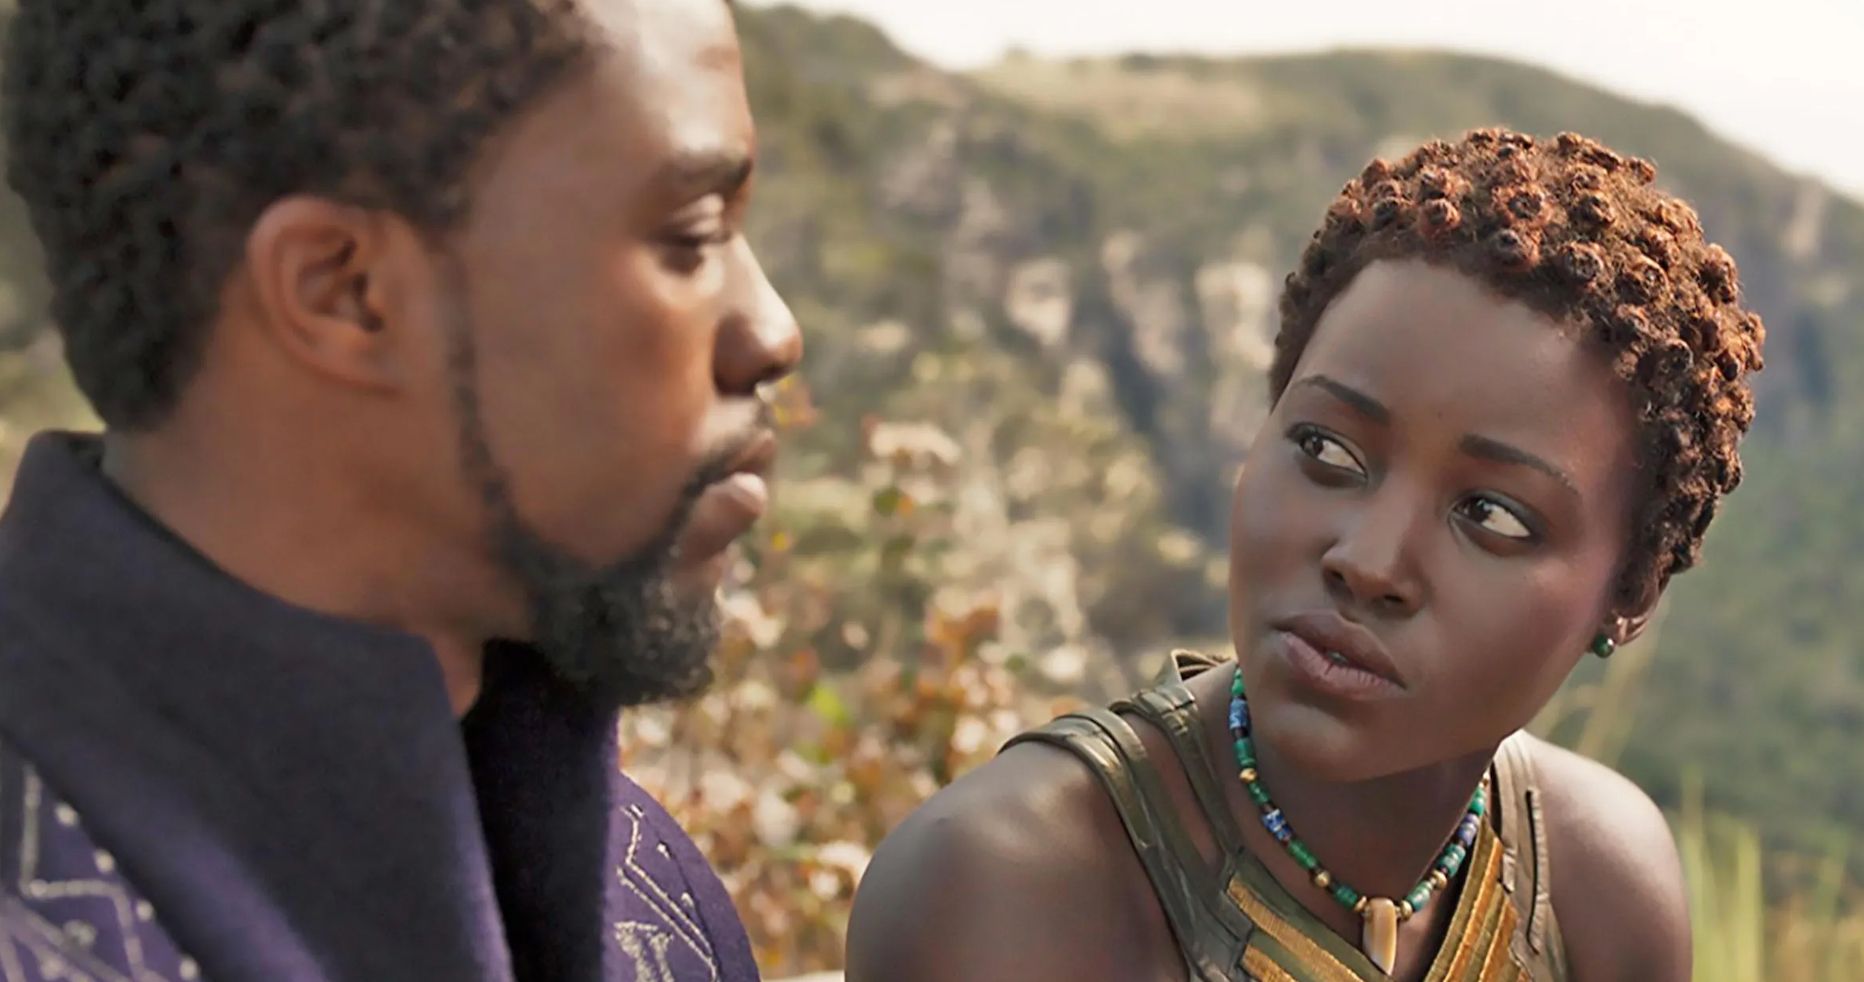 Black Panther 2 Director Has Exciting Ideas for Carrying Forward Teases Lupita Nyong'o